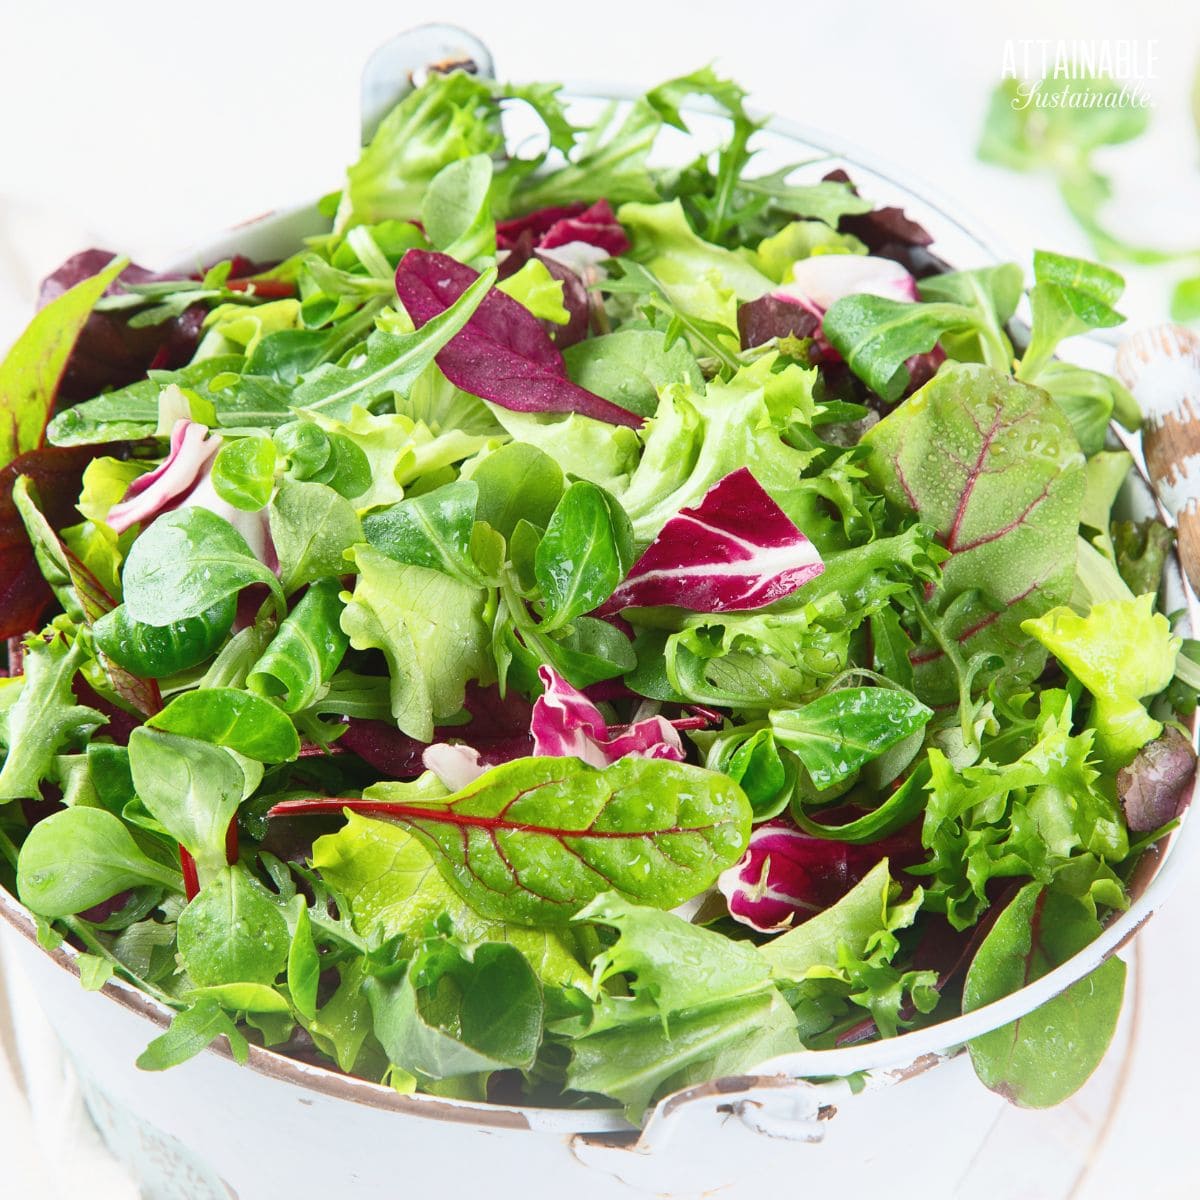 Green salad with baby beetroot greens.